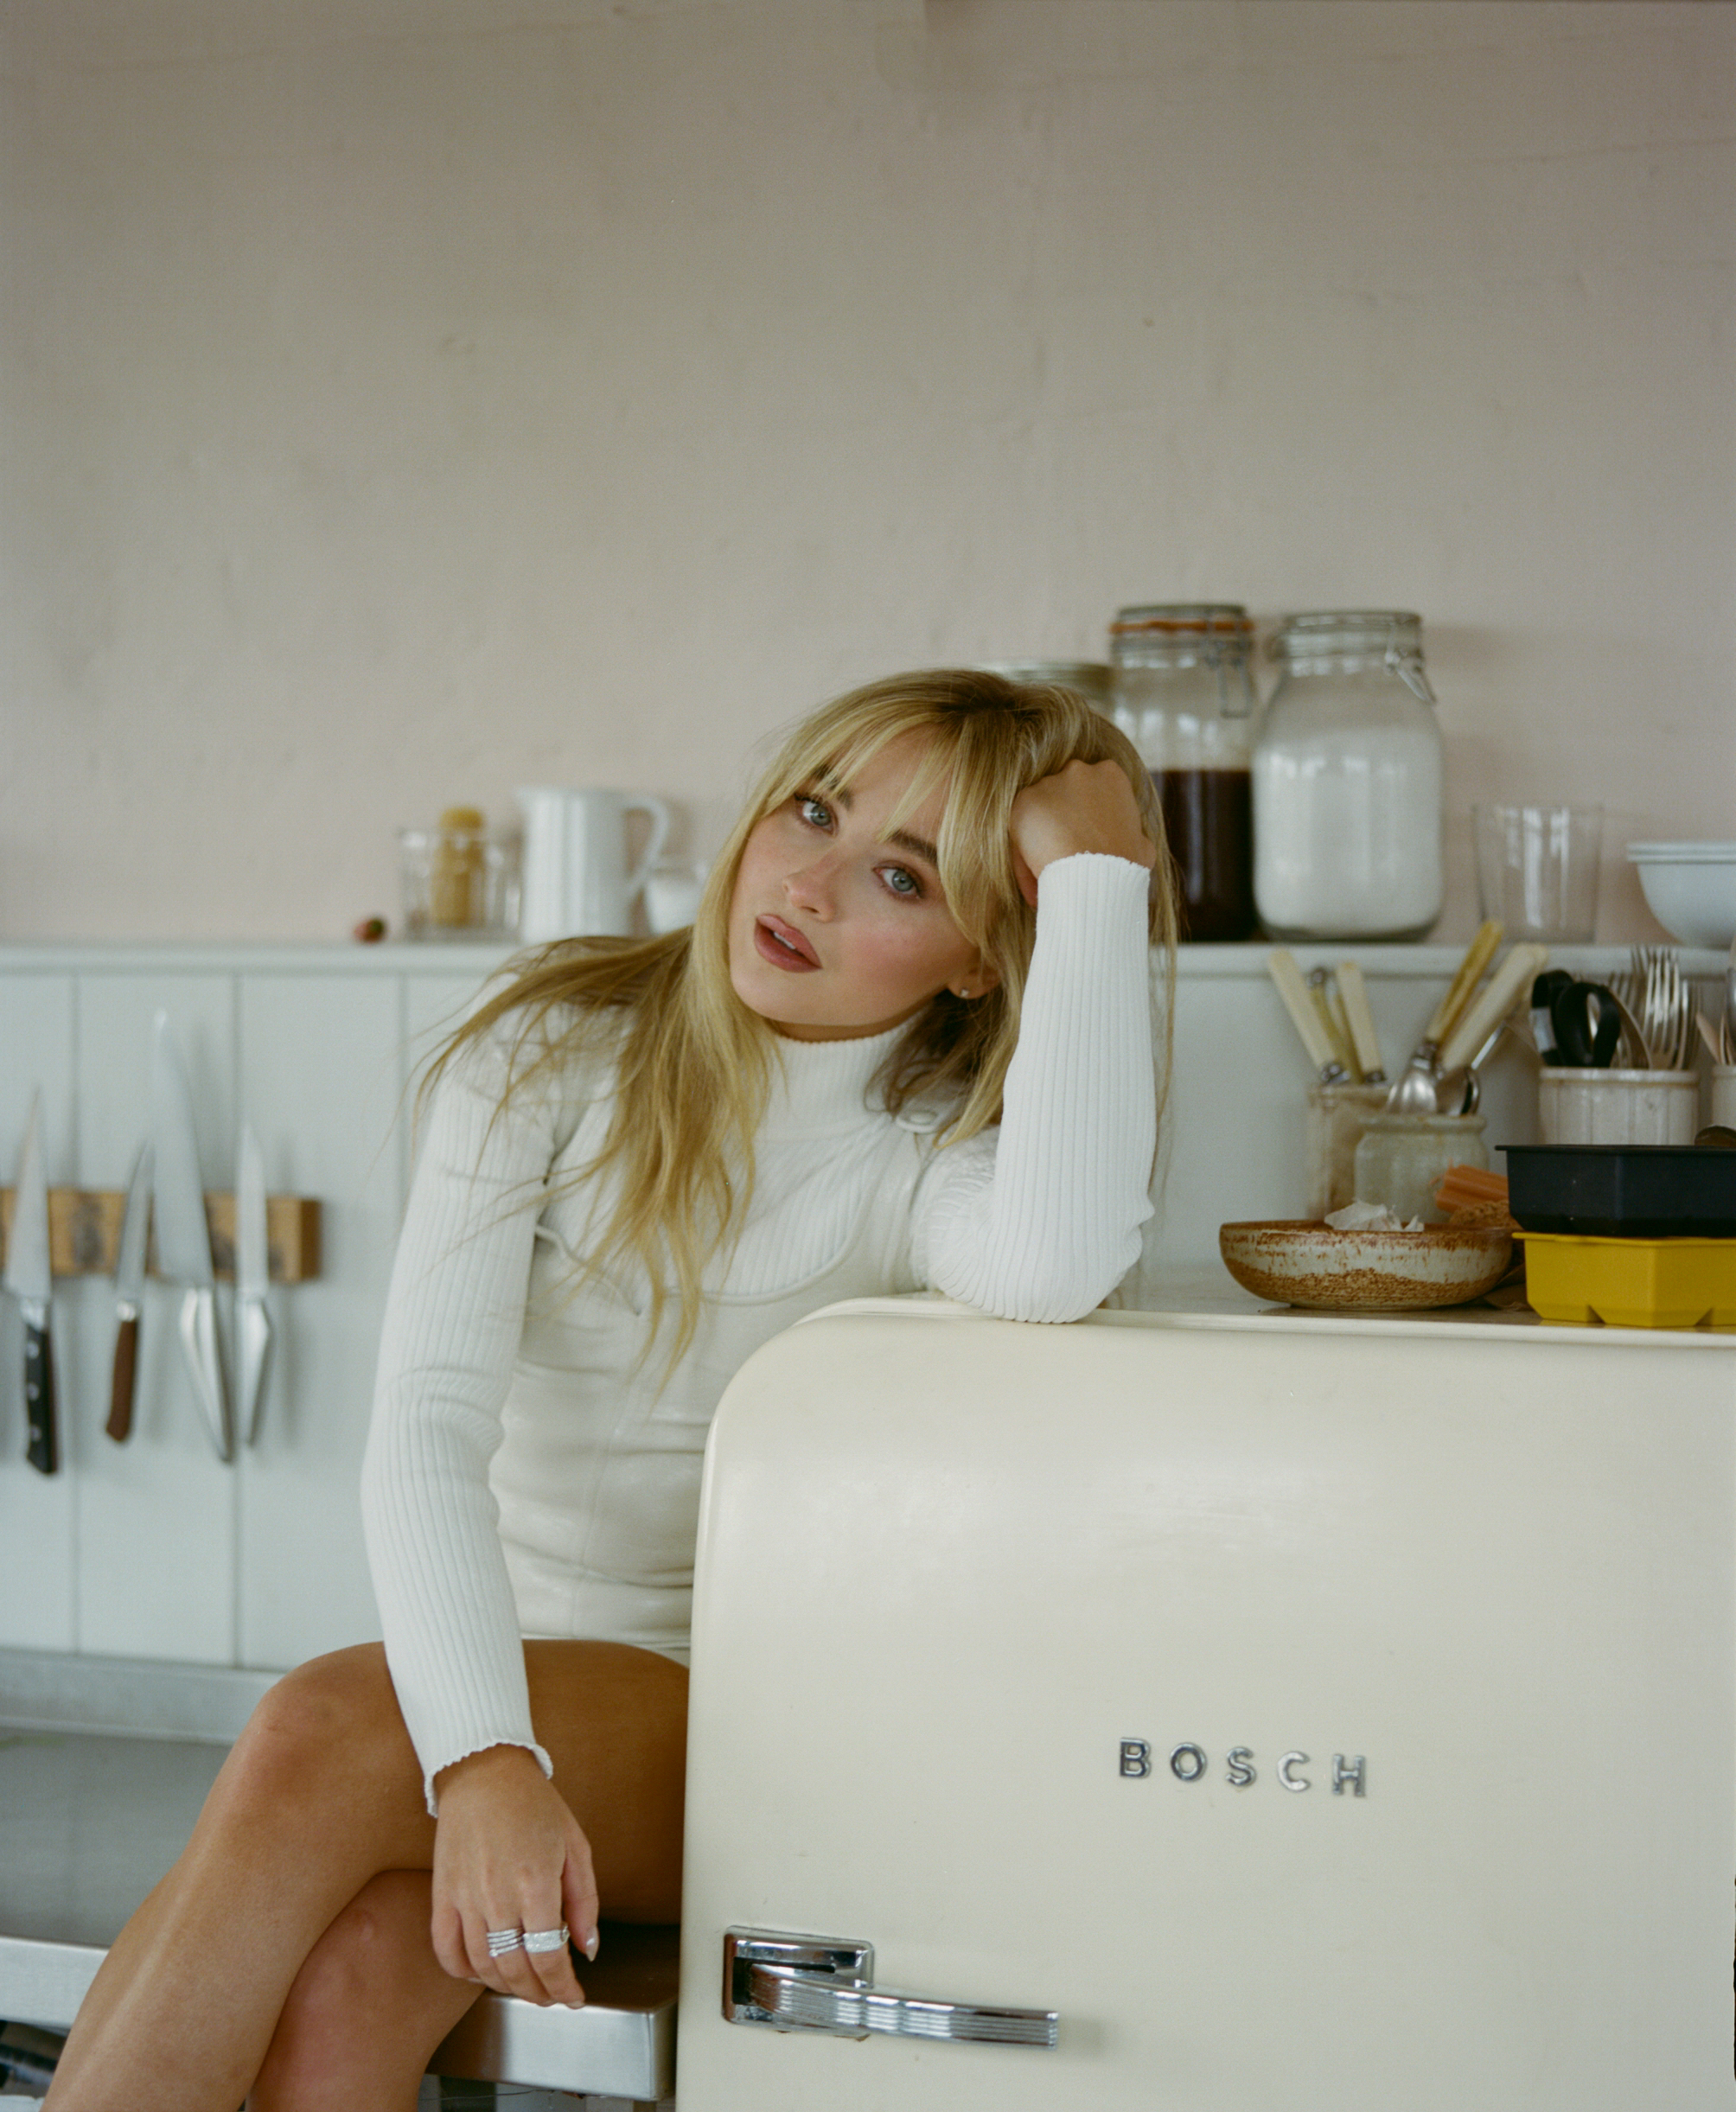 sabrina carpenter, a blonde woman, sits on a kitchen countertop resting her arm on a fridge